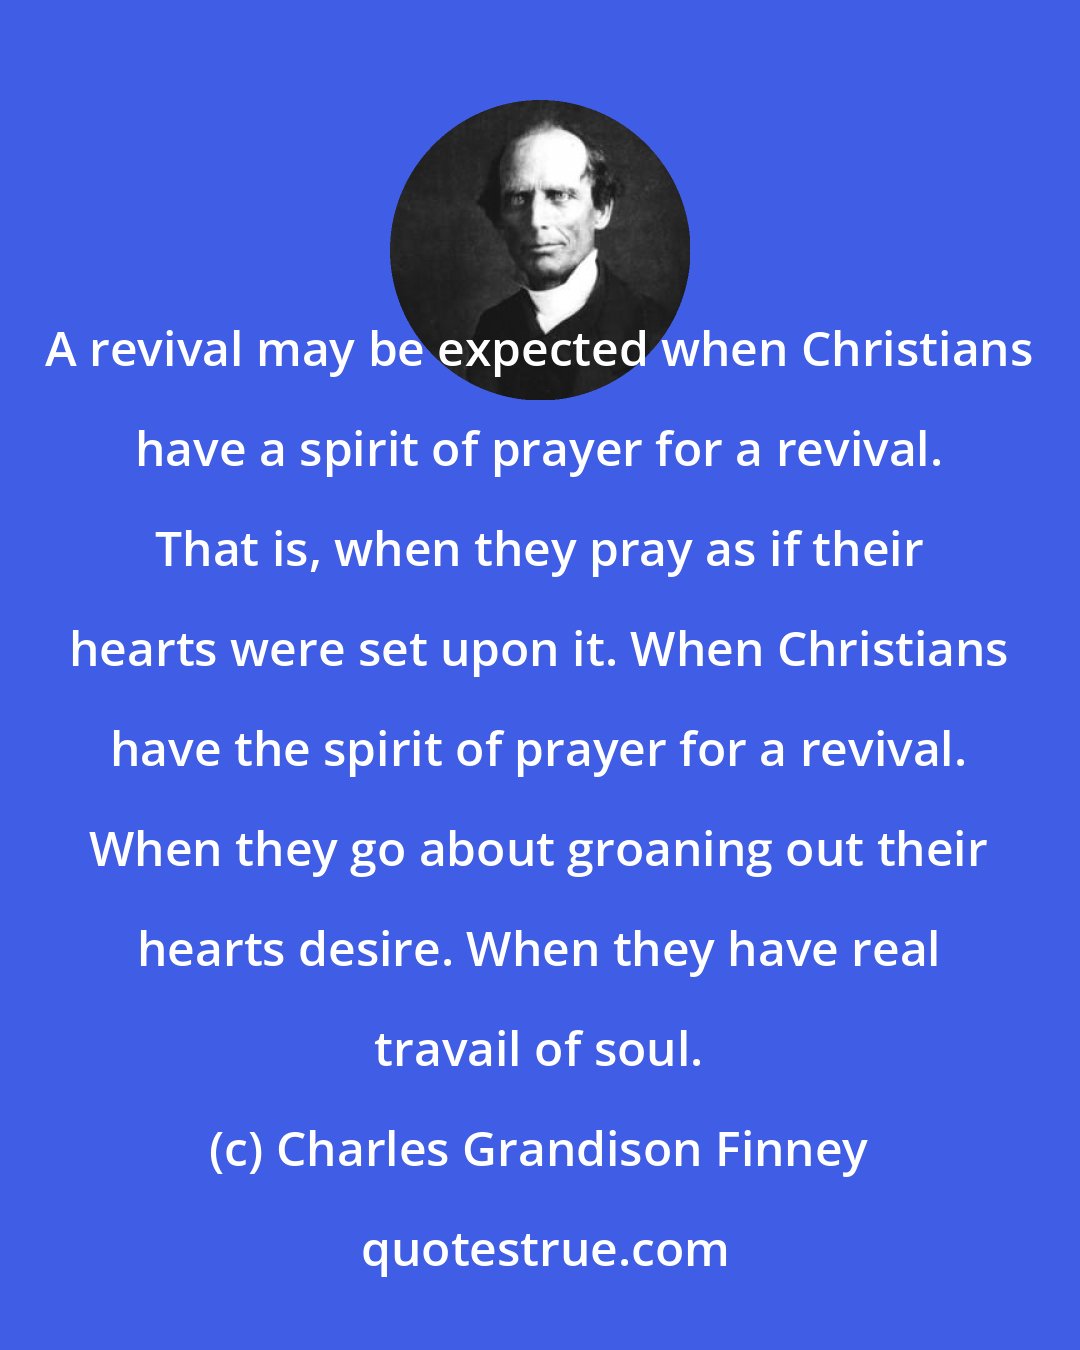 Charles Grandison Finney: A revival may be expected when Christians have a spirit of prayer for a revival. That is, when they pray as if their hearts were set upon it. When Christians have the spirit of prayer for a revival. When they go about groaning out their hearts desire. When they have real travail of soul.